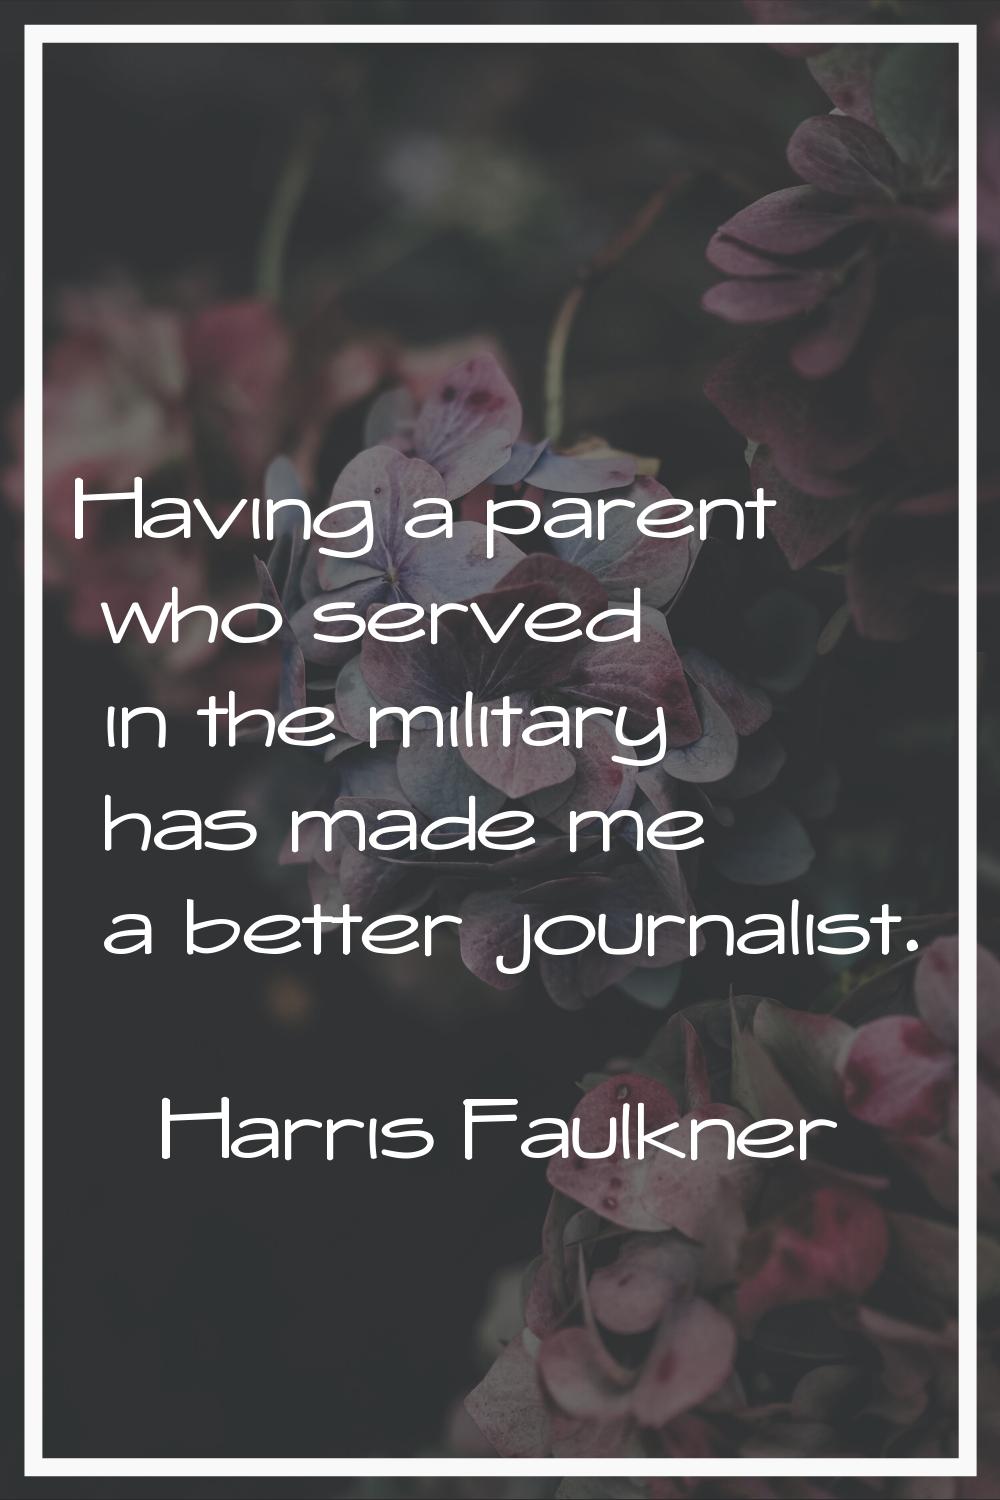 Having a parent who served in the military has made me a better journalist.